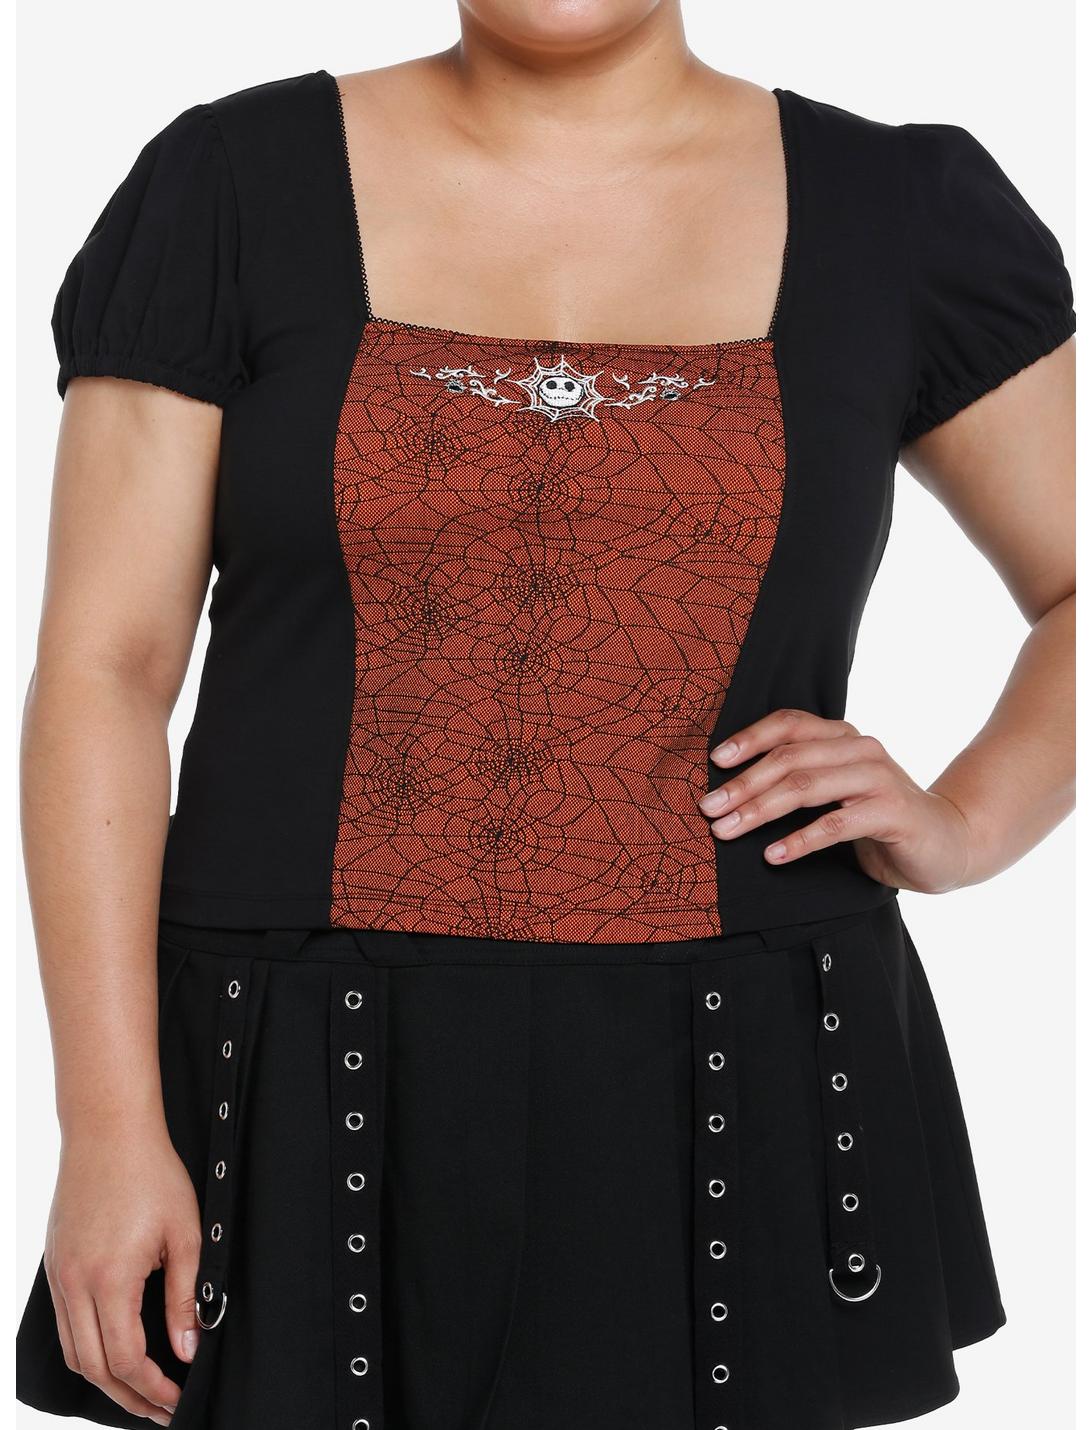 Her Universe The Nightmare Before Christmas Spiderweb Girls Top Plus Size, ORANGE, hi-res